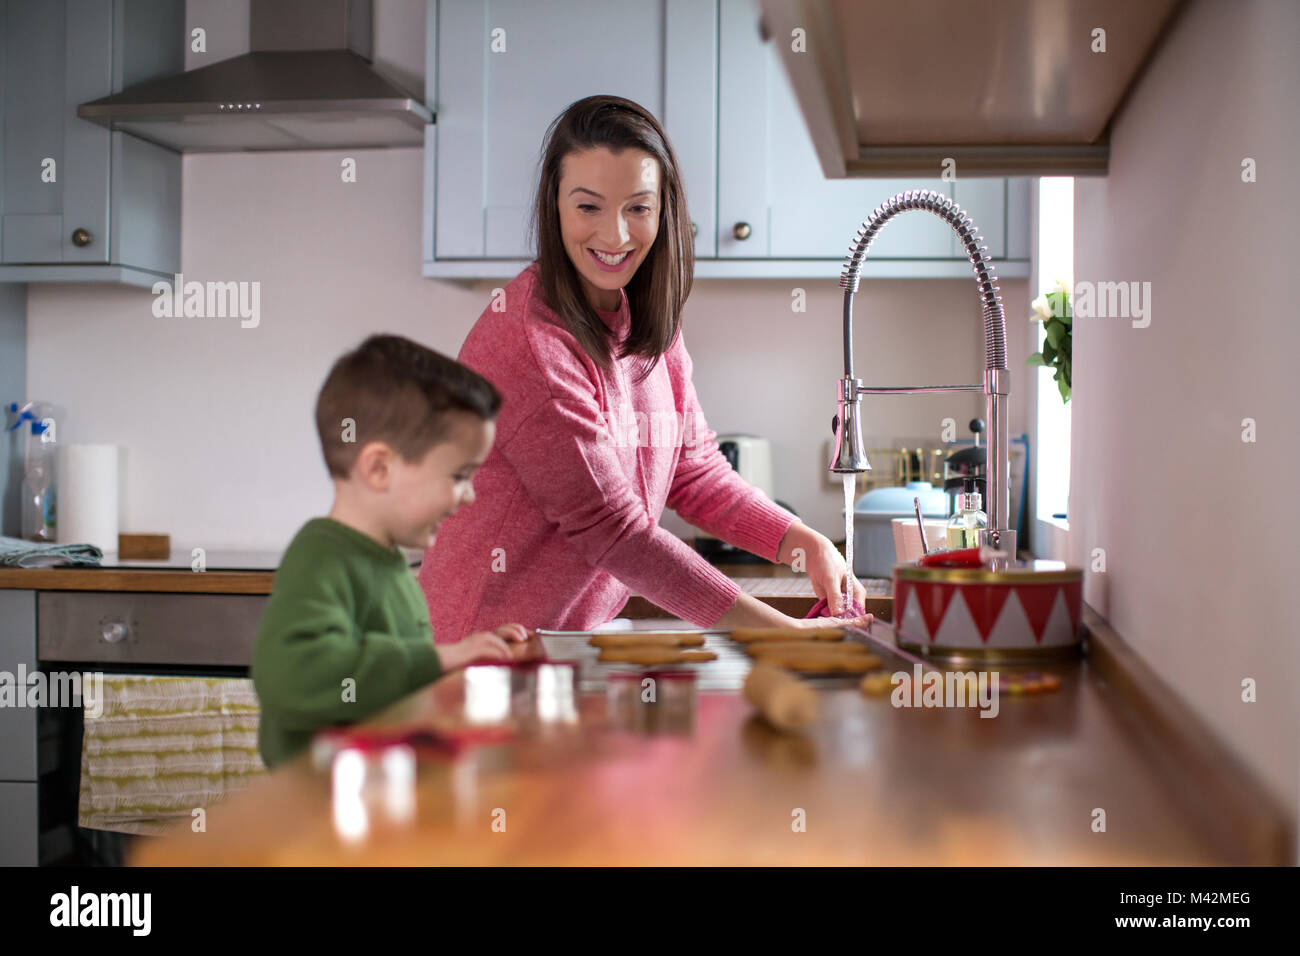 Mother and Son baking cookies in kitchen Stock Photo